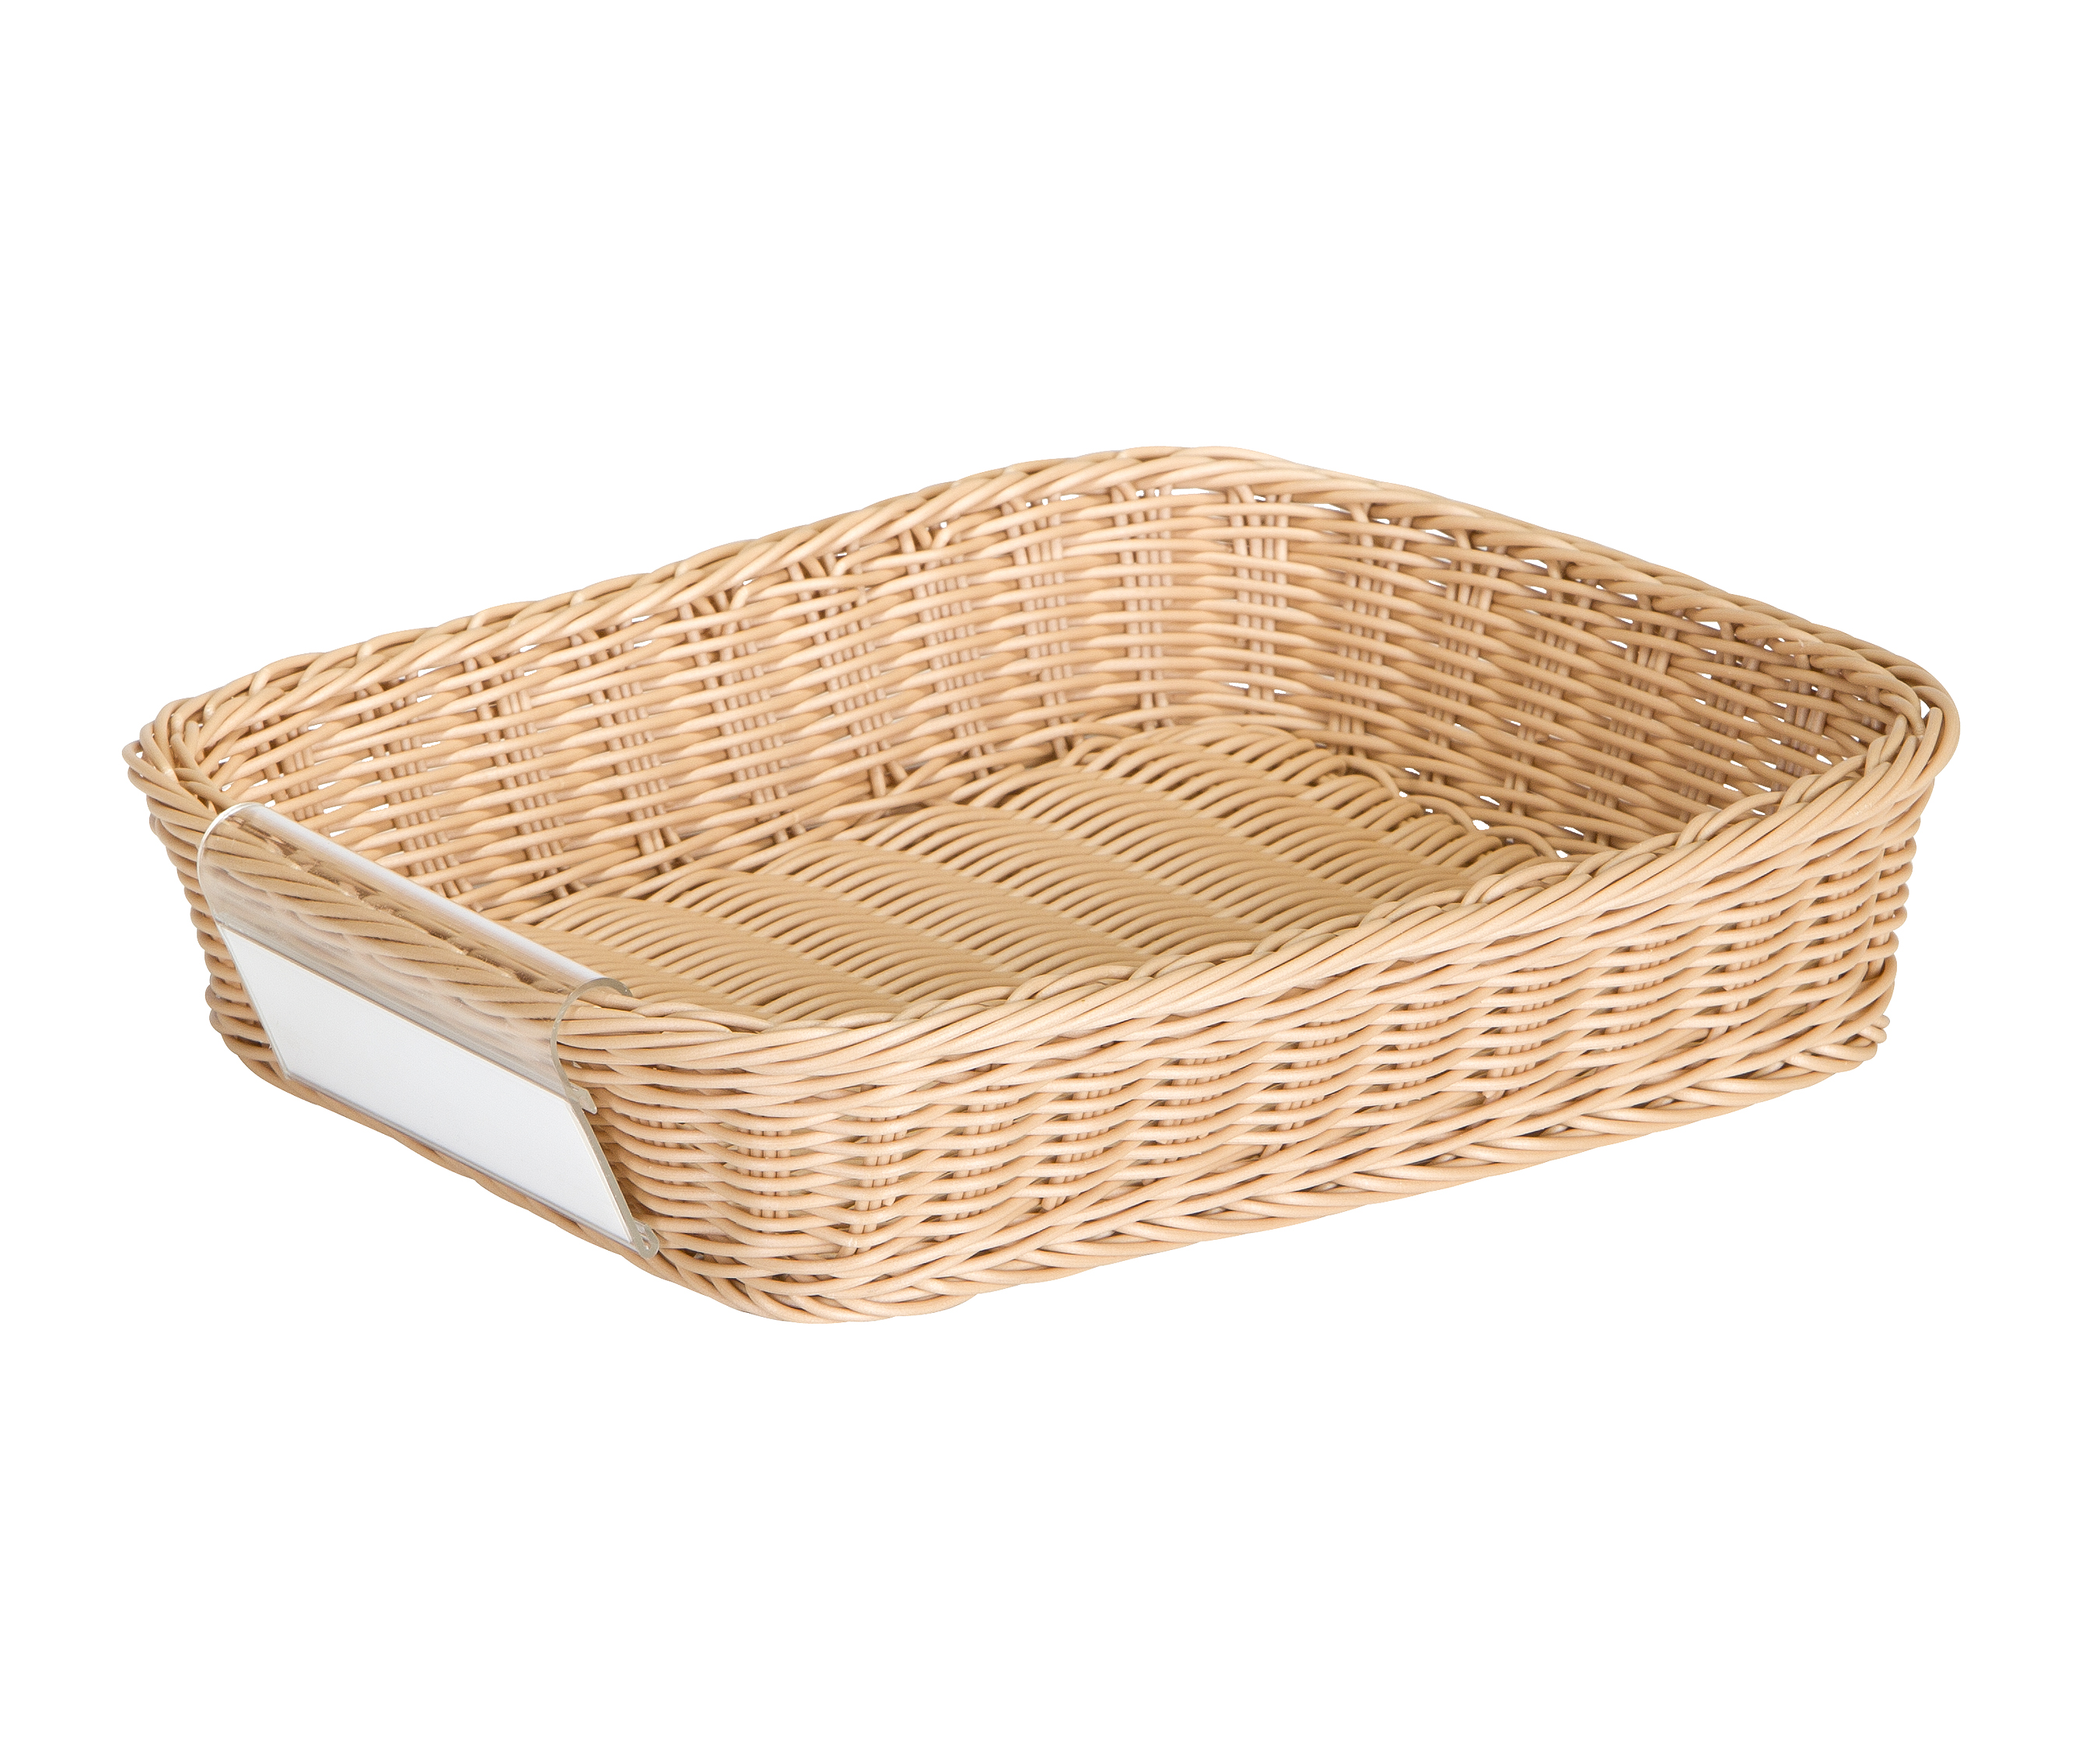 https://www.communityplaythings.com/-/media/images/product-images/classroom/shelving/product-images/g484-shallow-basket/g484-primary.ashx?rev=e5a9269bac034822b6ec4fb5399c474d&hash=FEDE8044002CBB5A687CCF6FCFC3917F